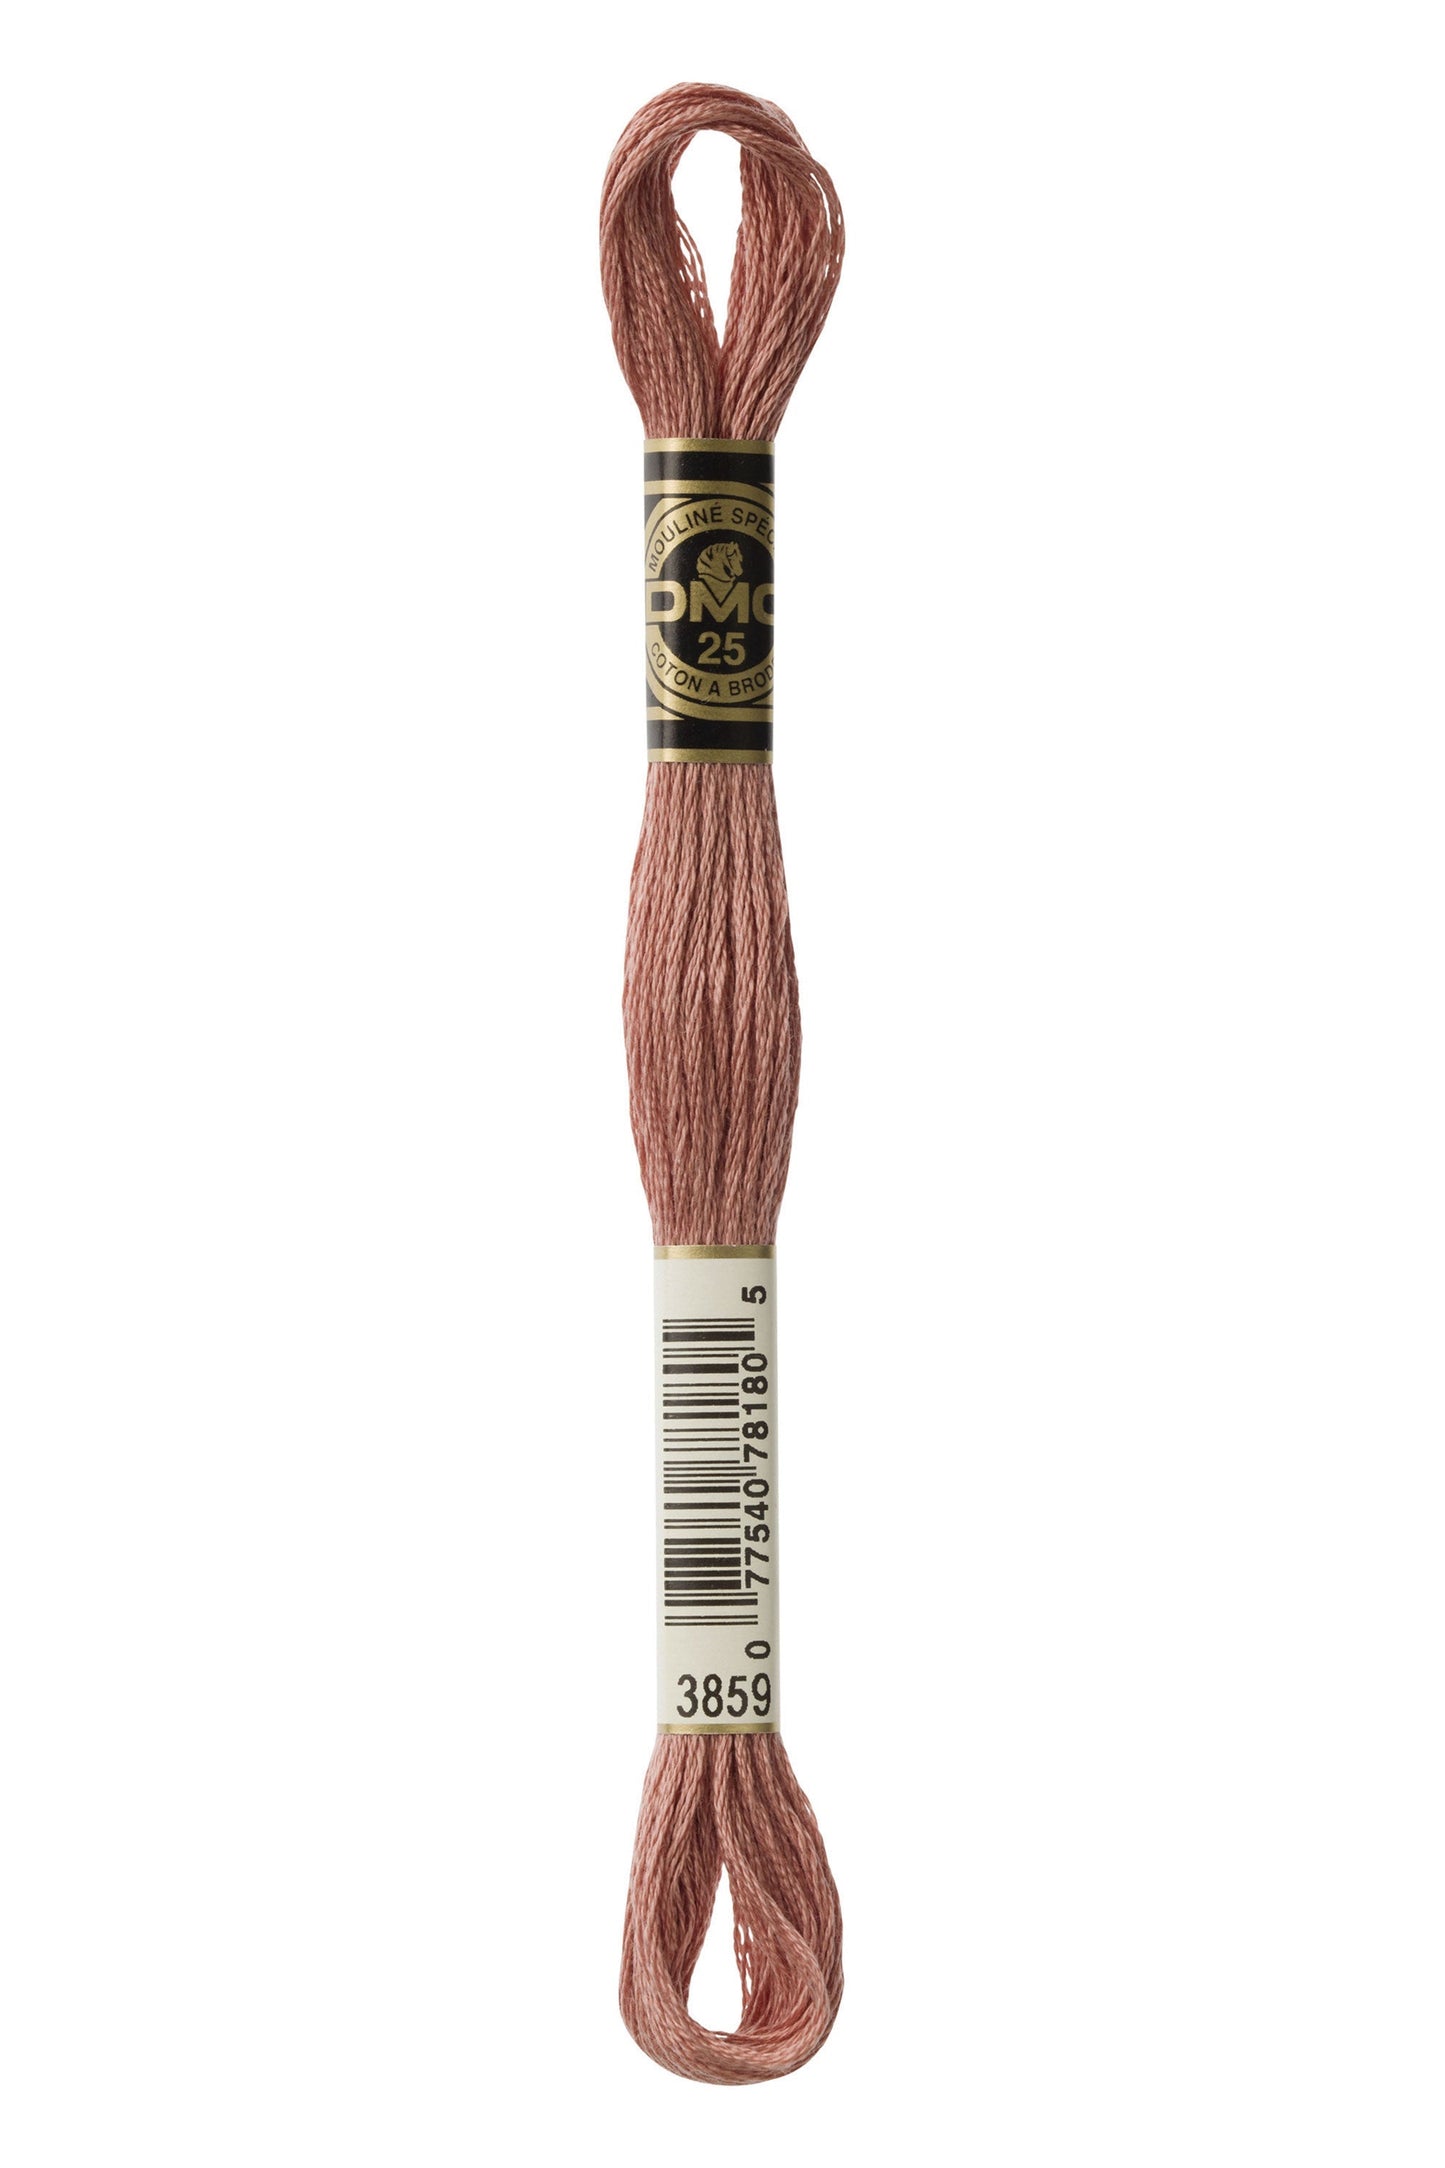 Six-Strand Embroidery Floss - 3859 (Clay)-Embroidery Thread-Wild and Woolly Yarns